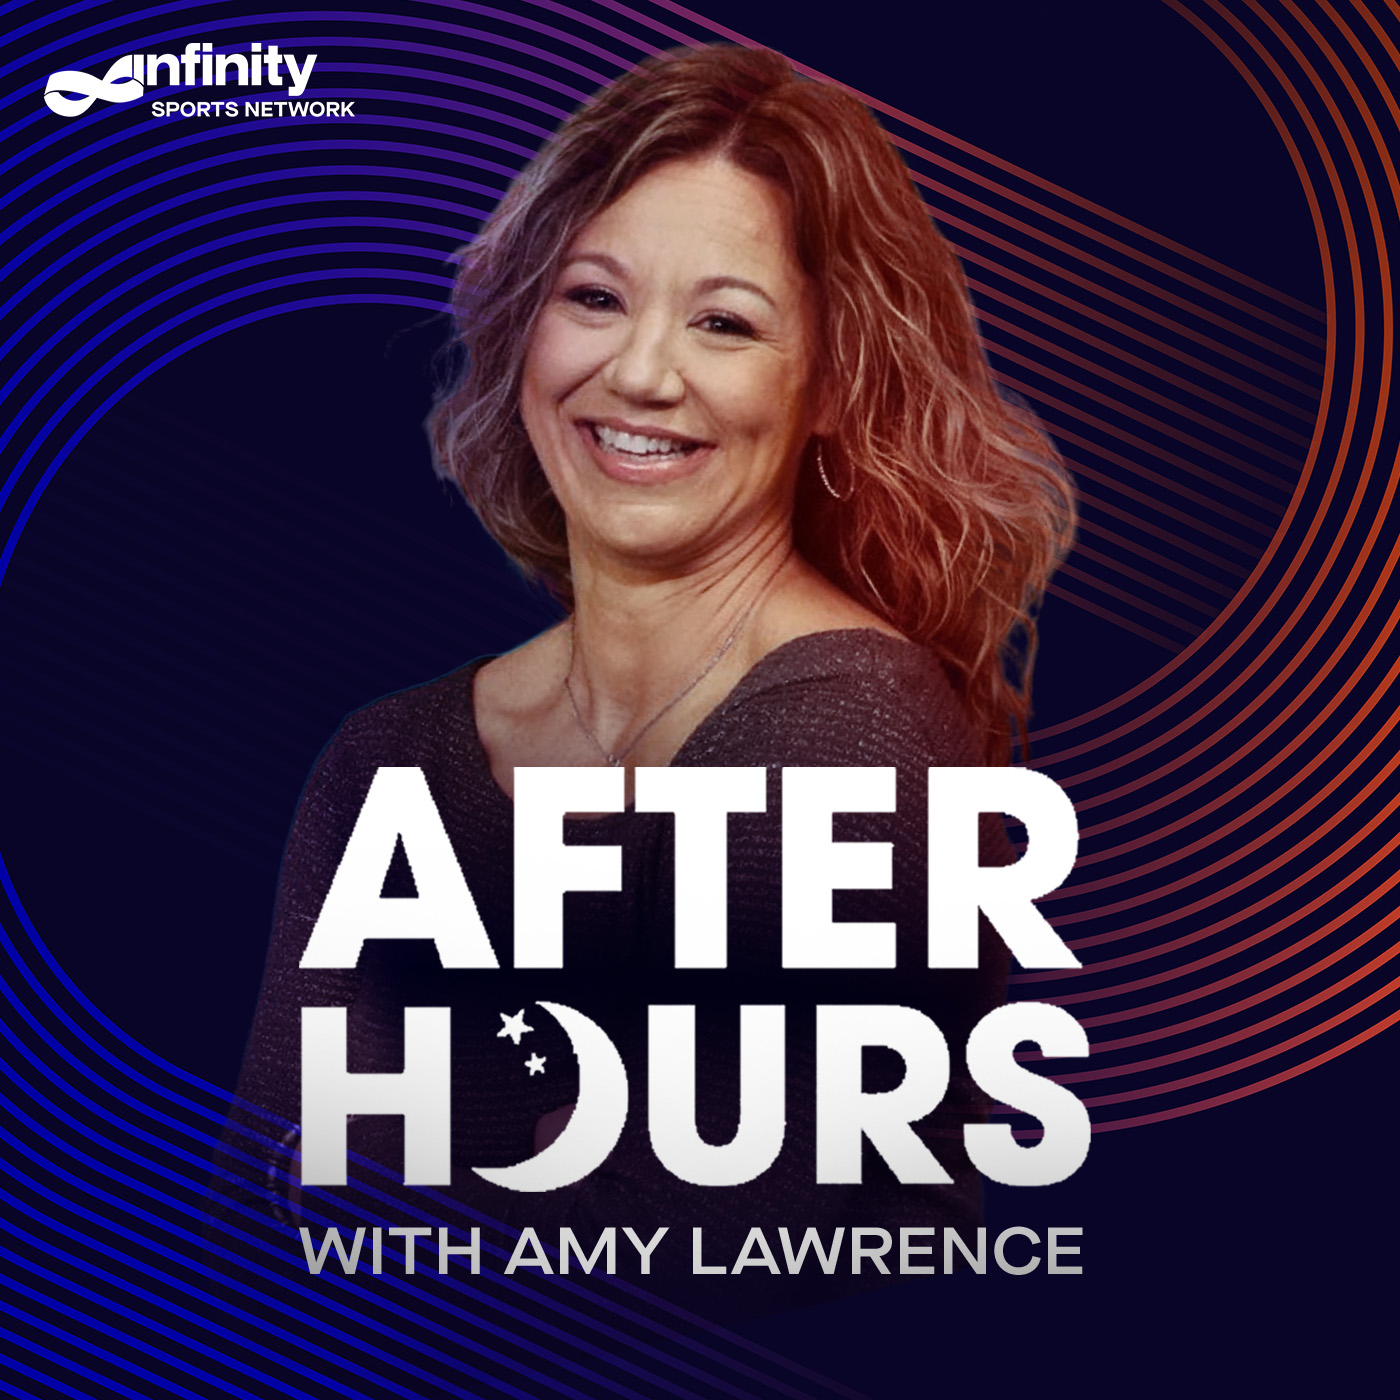 11-14-23 After Hours with Amy Lawrence PODCAST: Hour 4